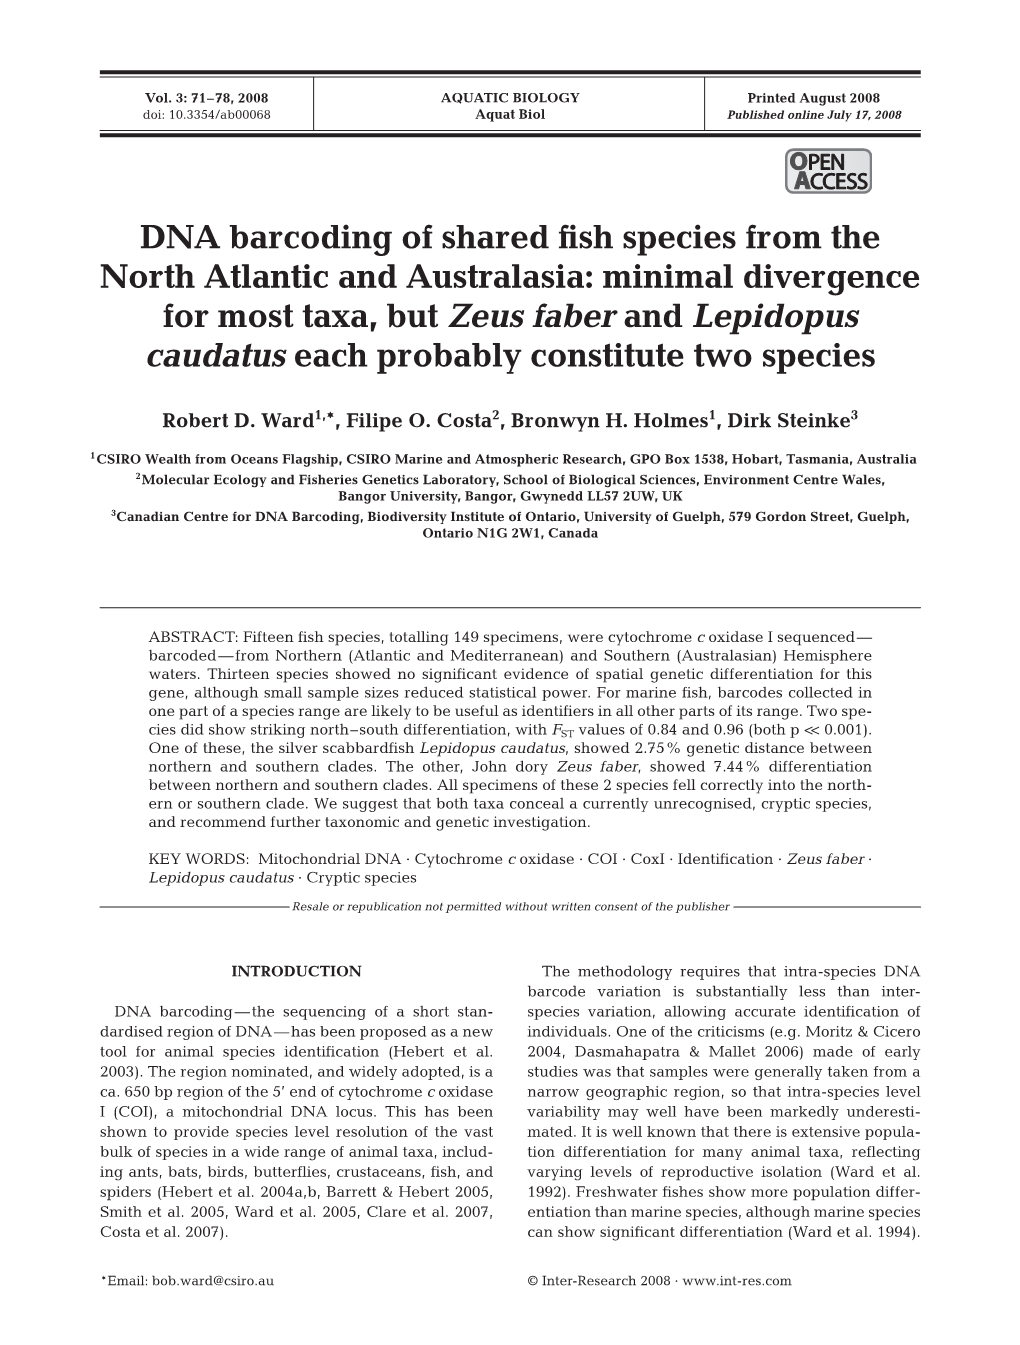 DNA Barcoding of Shared Fish Species from the North Atlantic And